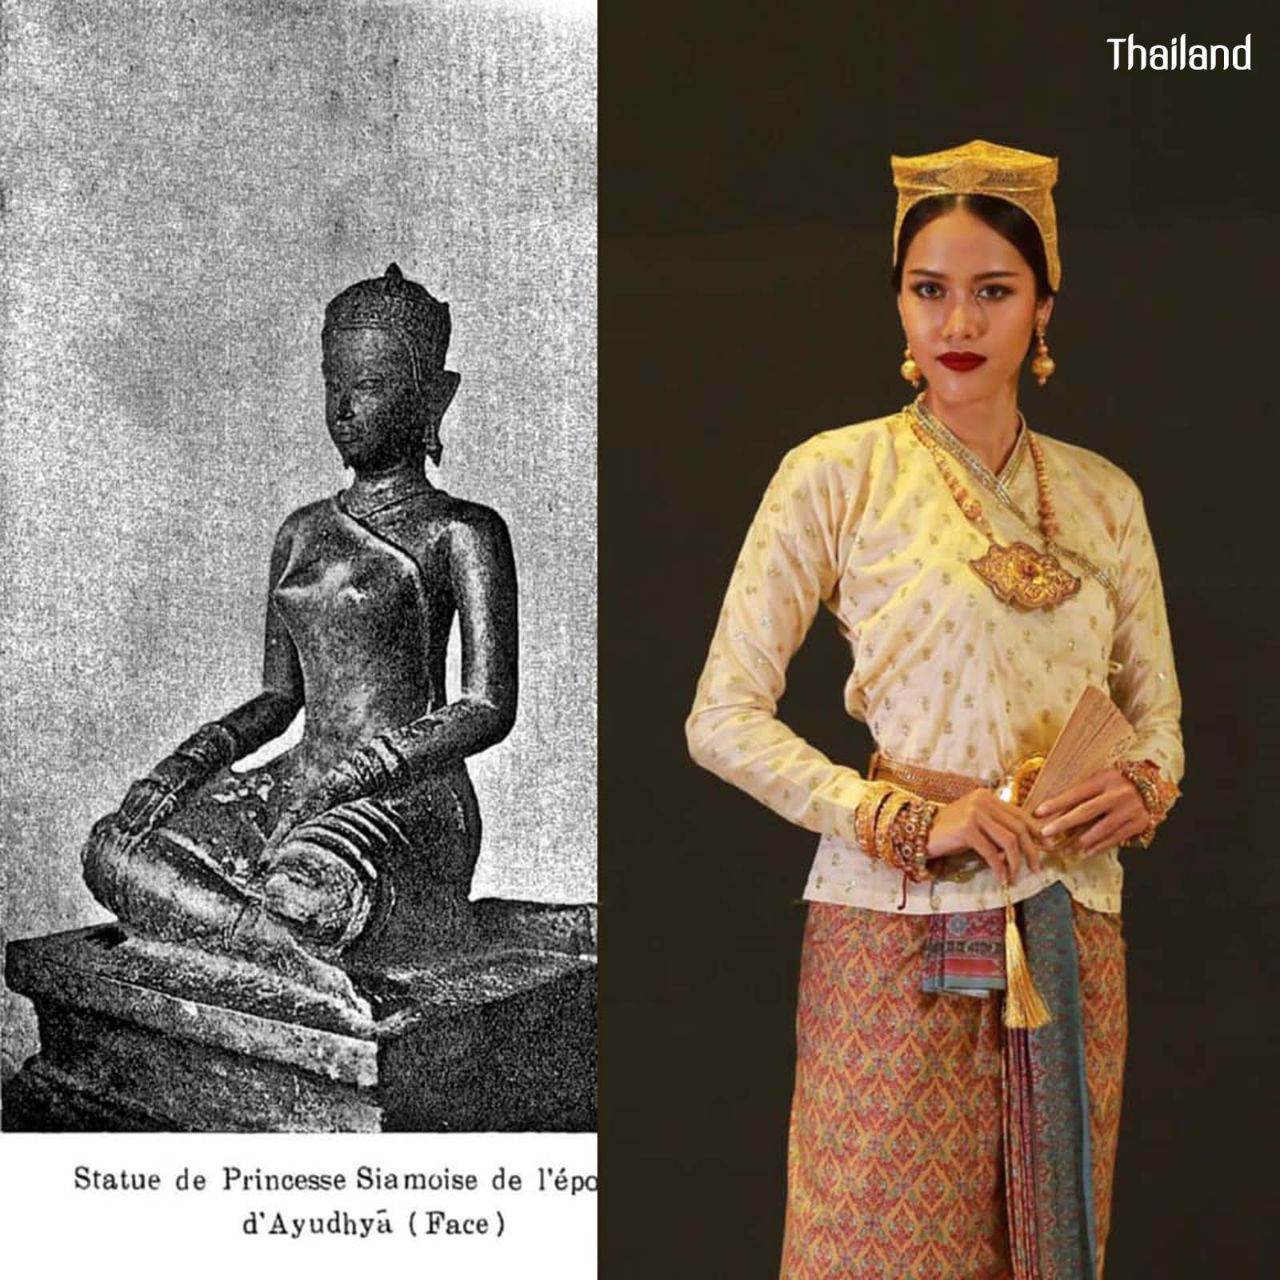 THAILAND 🇹🇭 | The Research of Ancient Outfit in Ayutthaya kingdom 👑